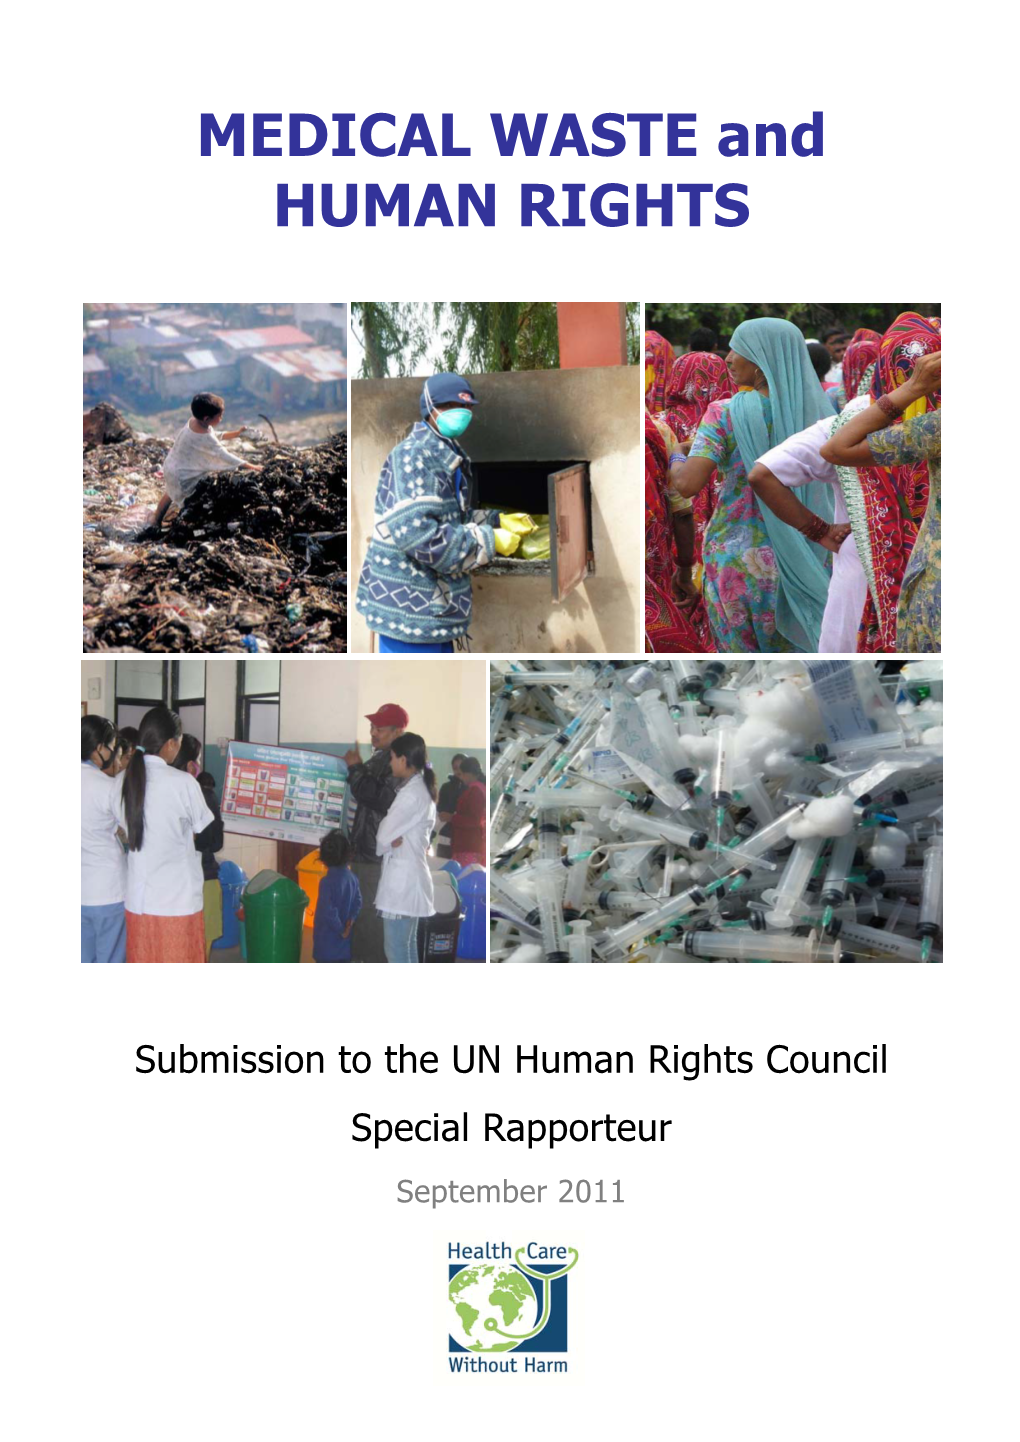 MEDICAL WASTE and HUMAN RIGHTS